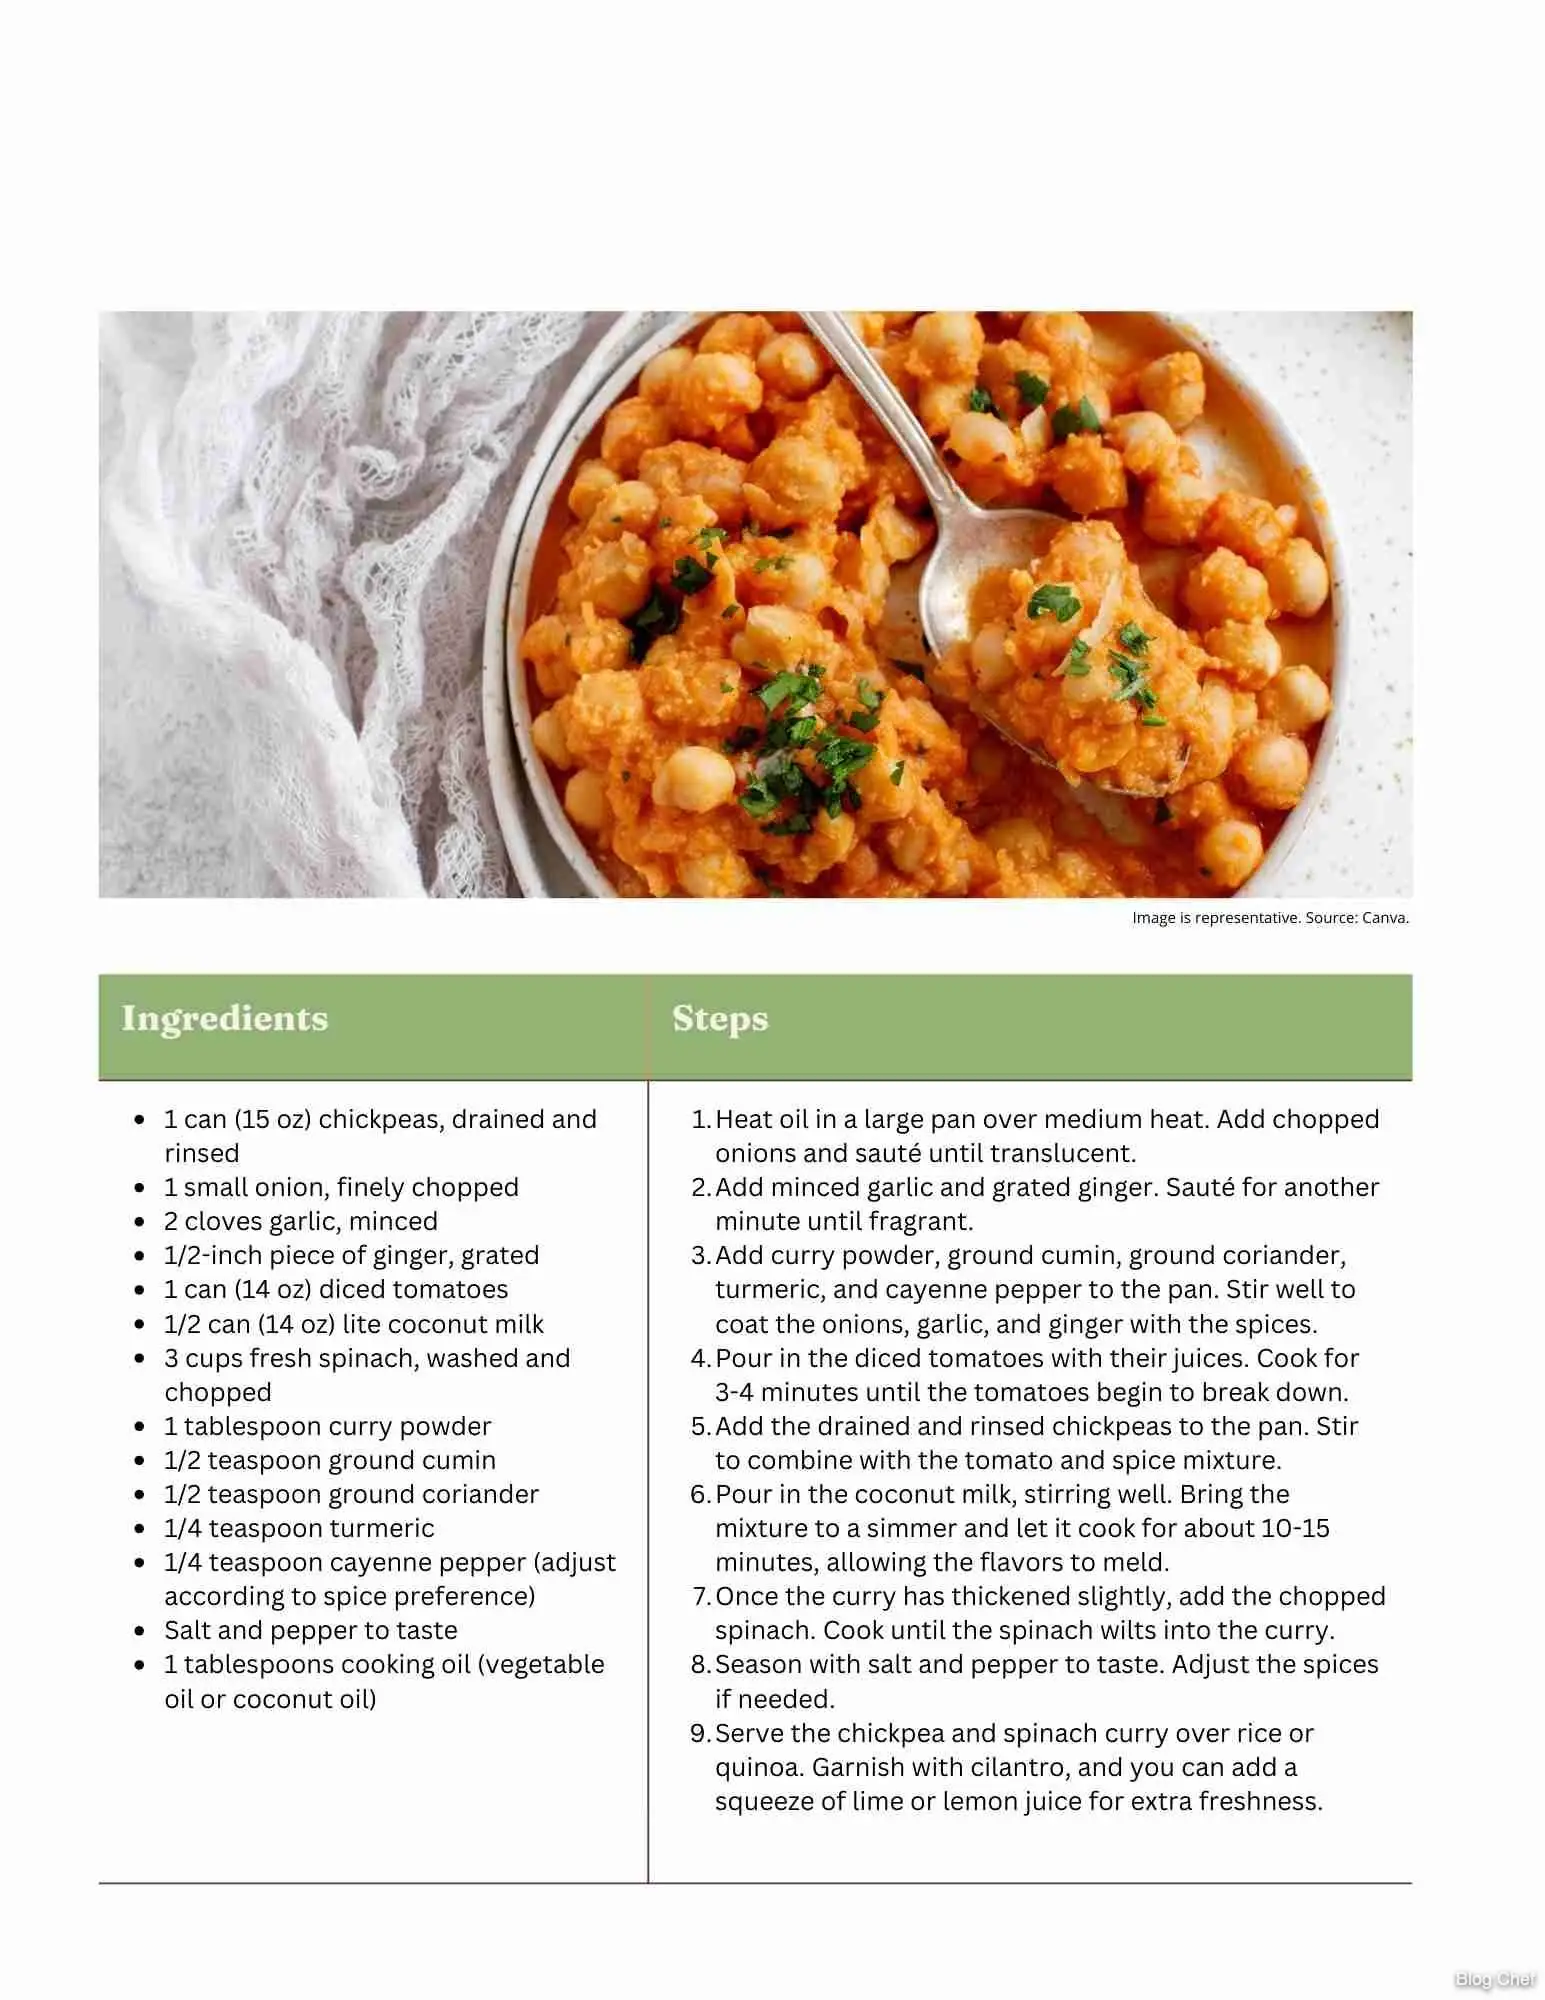 Recipe card for spinach and chickpea curry.